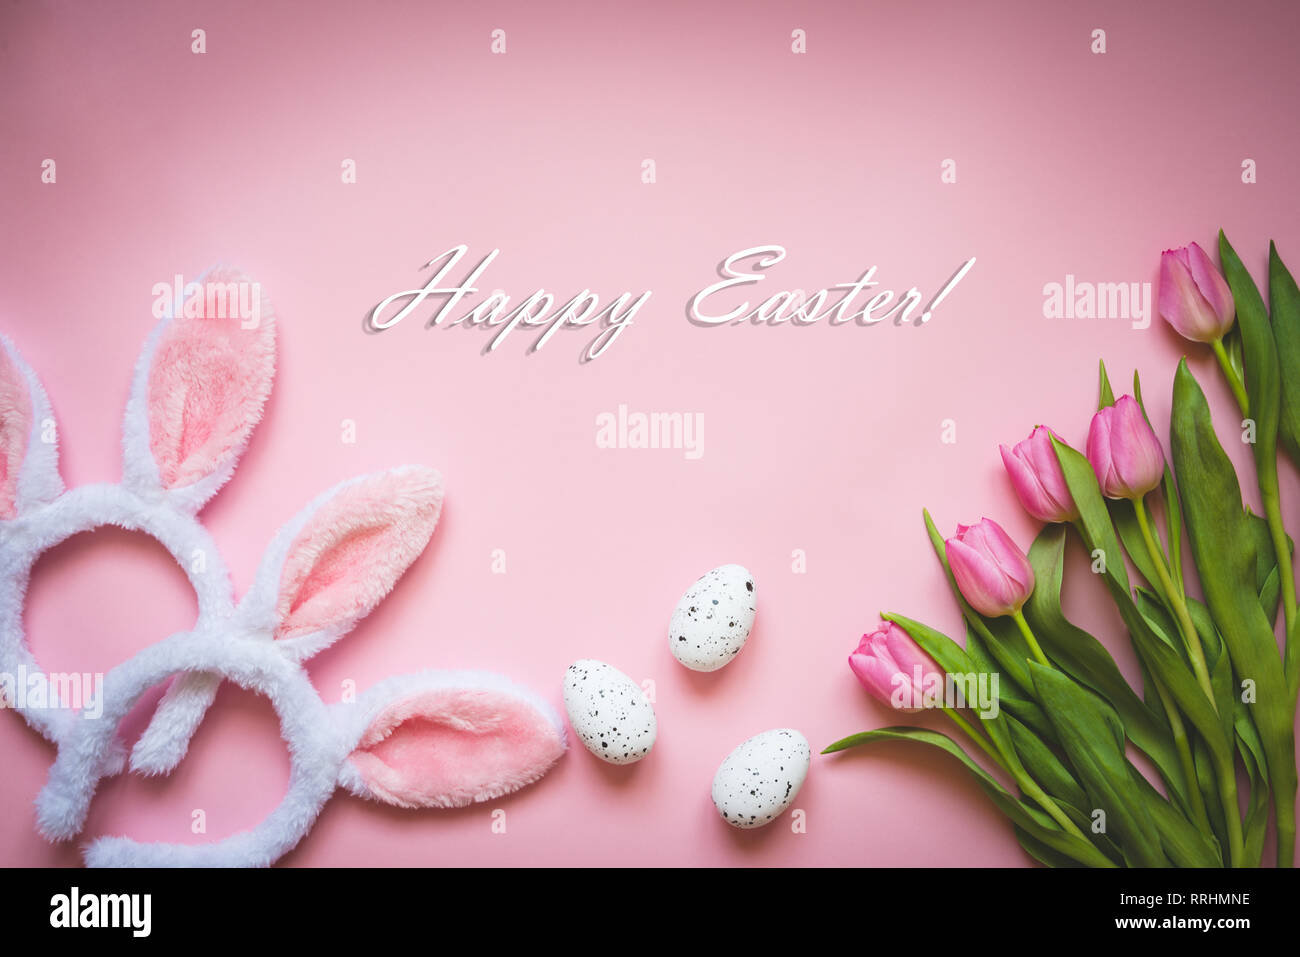 Top view of Easter eggs, pink tulips and two white fluffy bunny ears over pink background. Easter concept background. Happy Easter text. Stock Photo